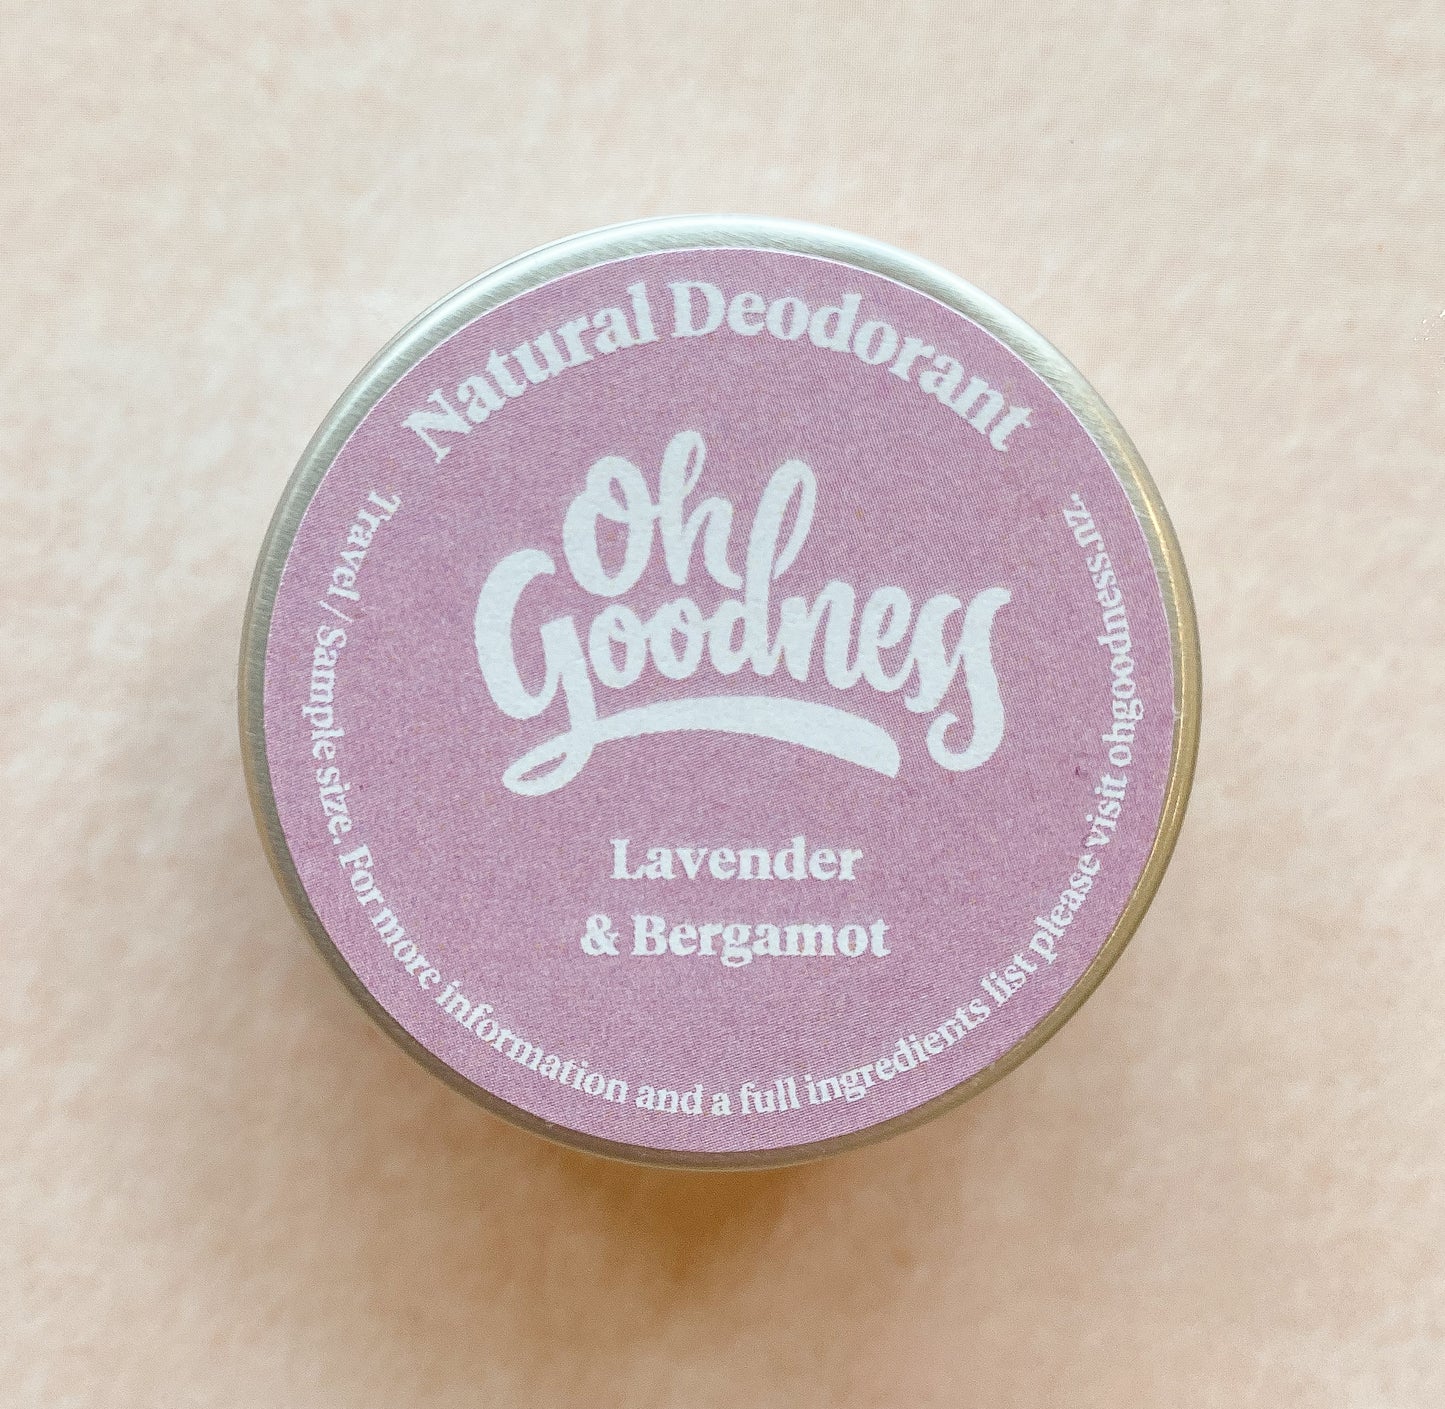 Natural deodorant - Sample size 18g Oh Goodness